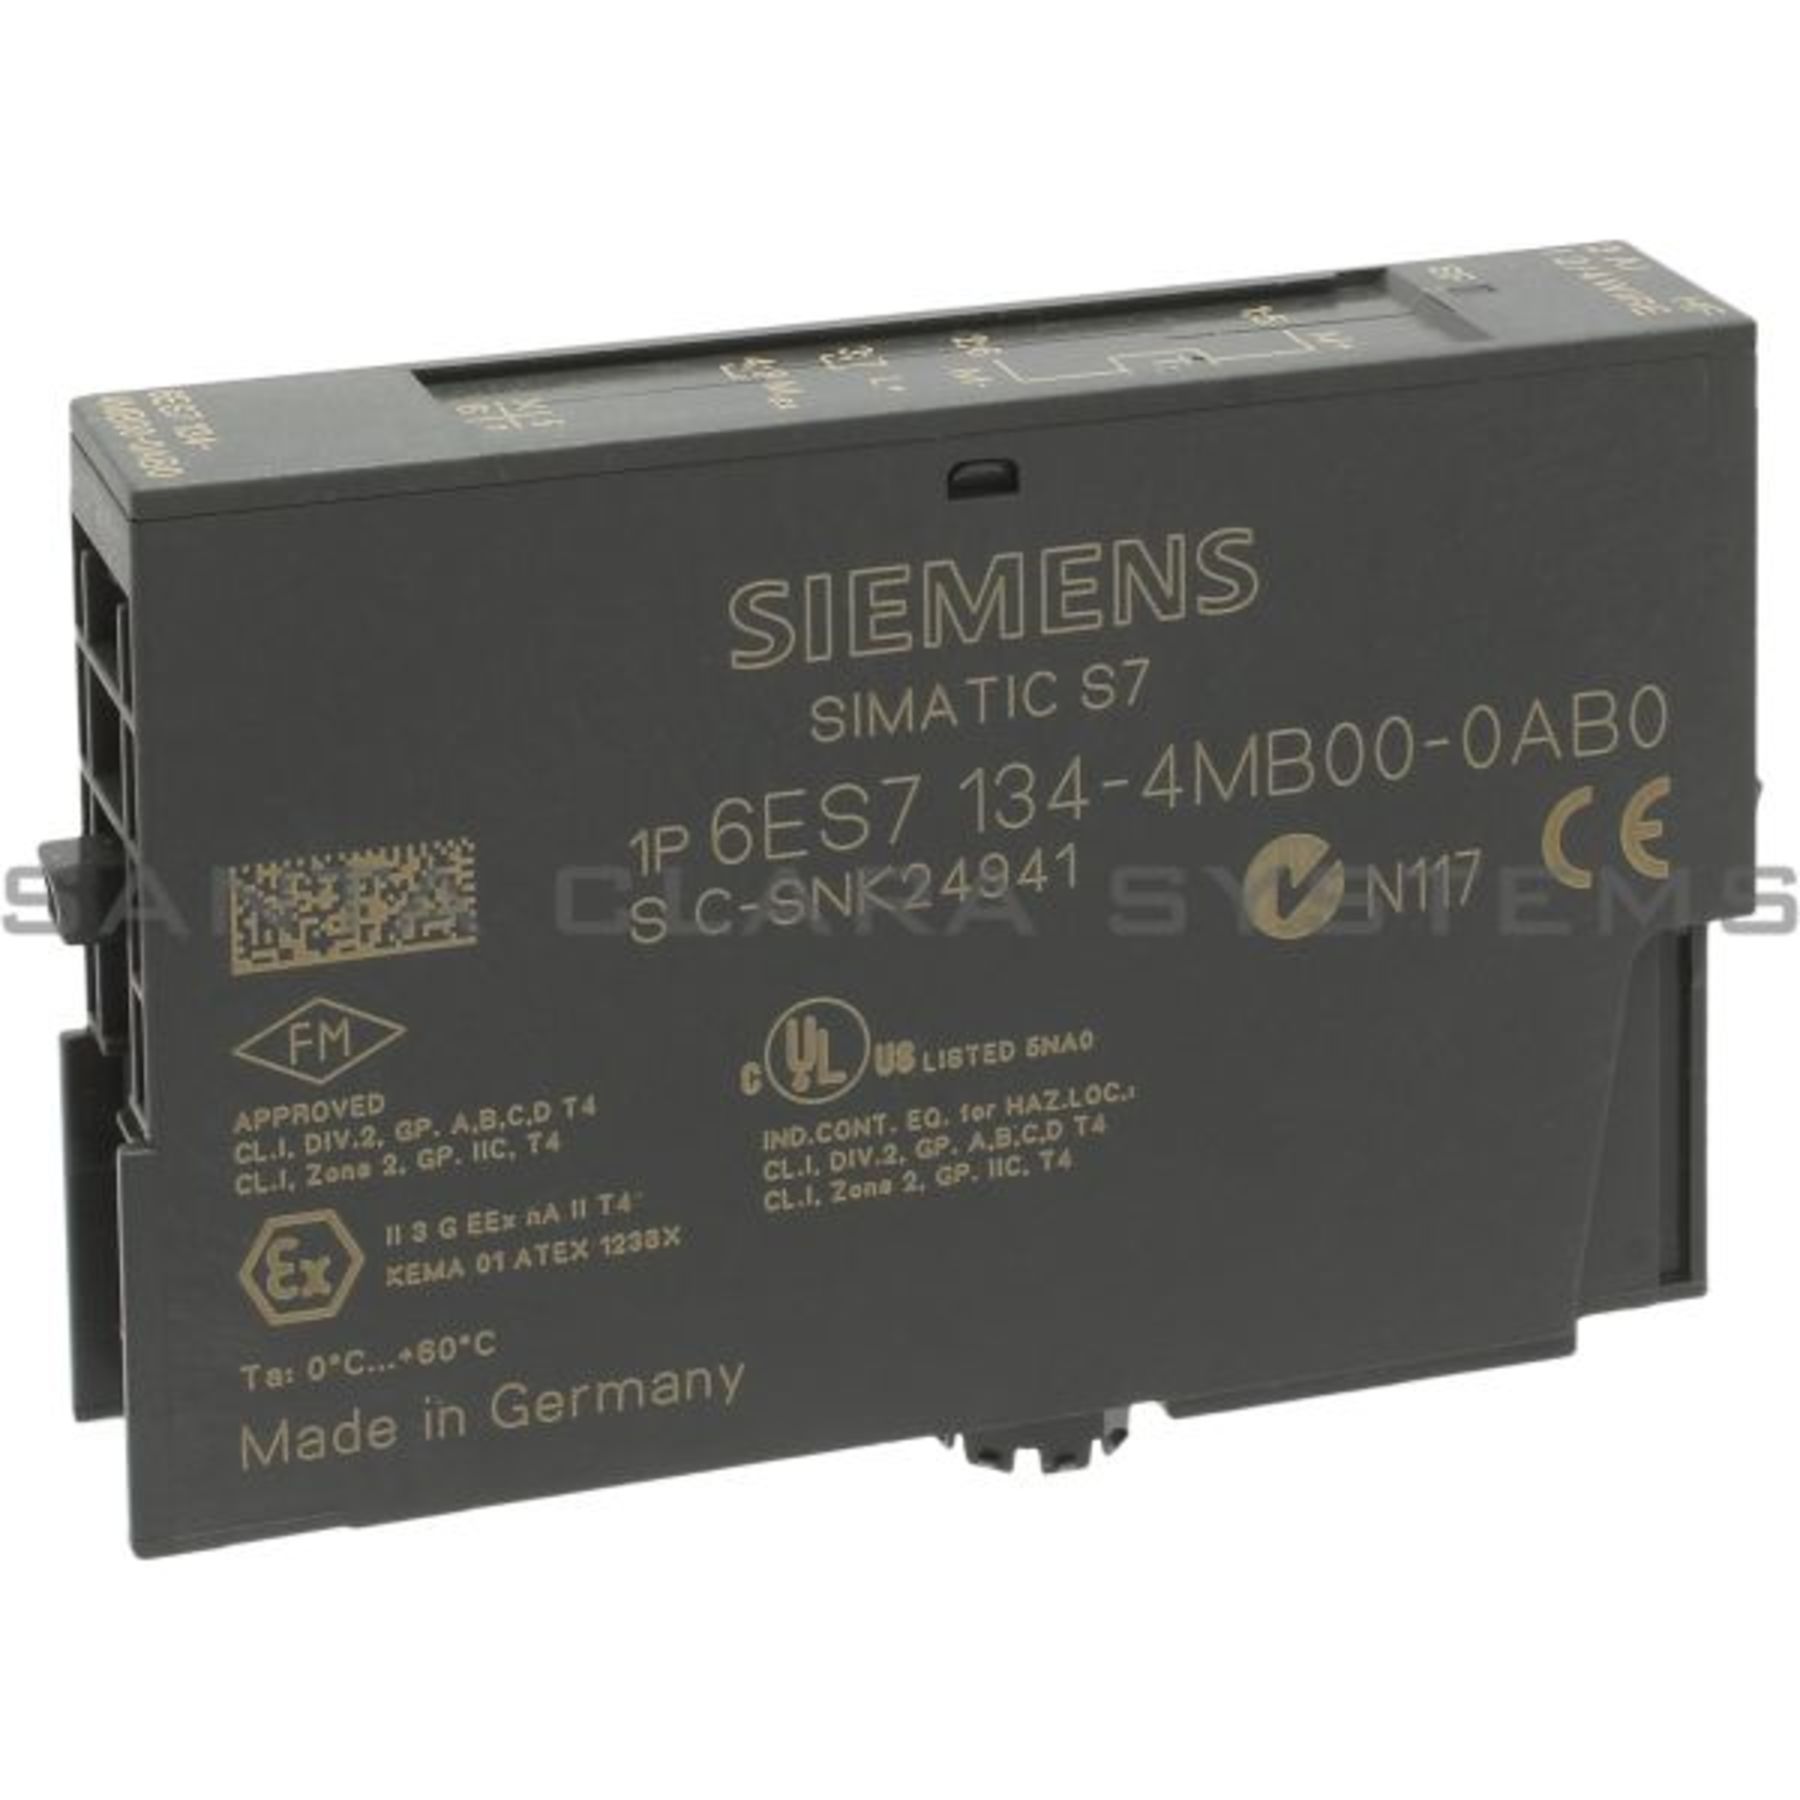 6ES7134-4MB00-0AB0 Siemens In stock and ready to ship - Santa